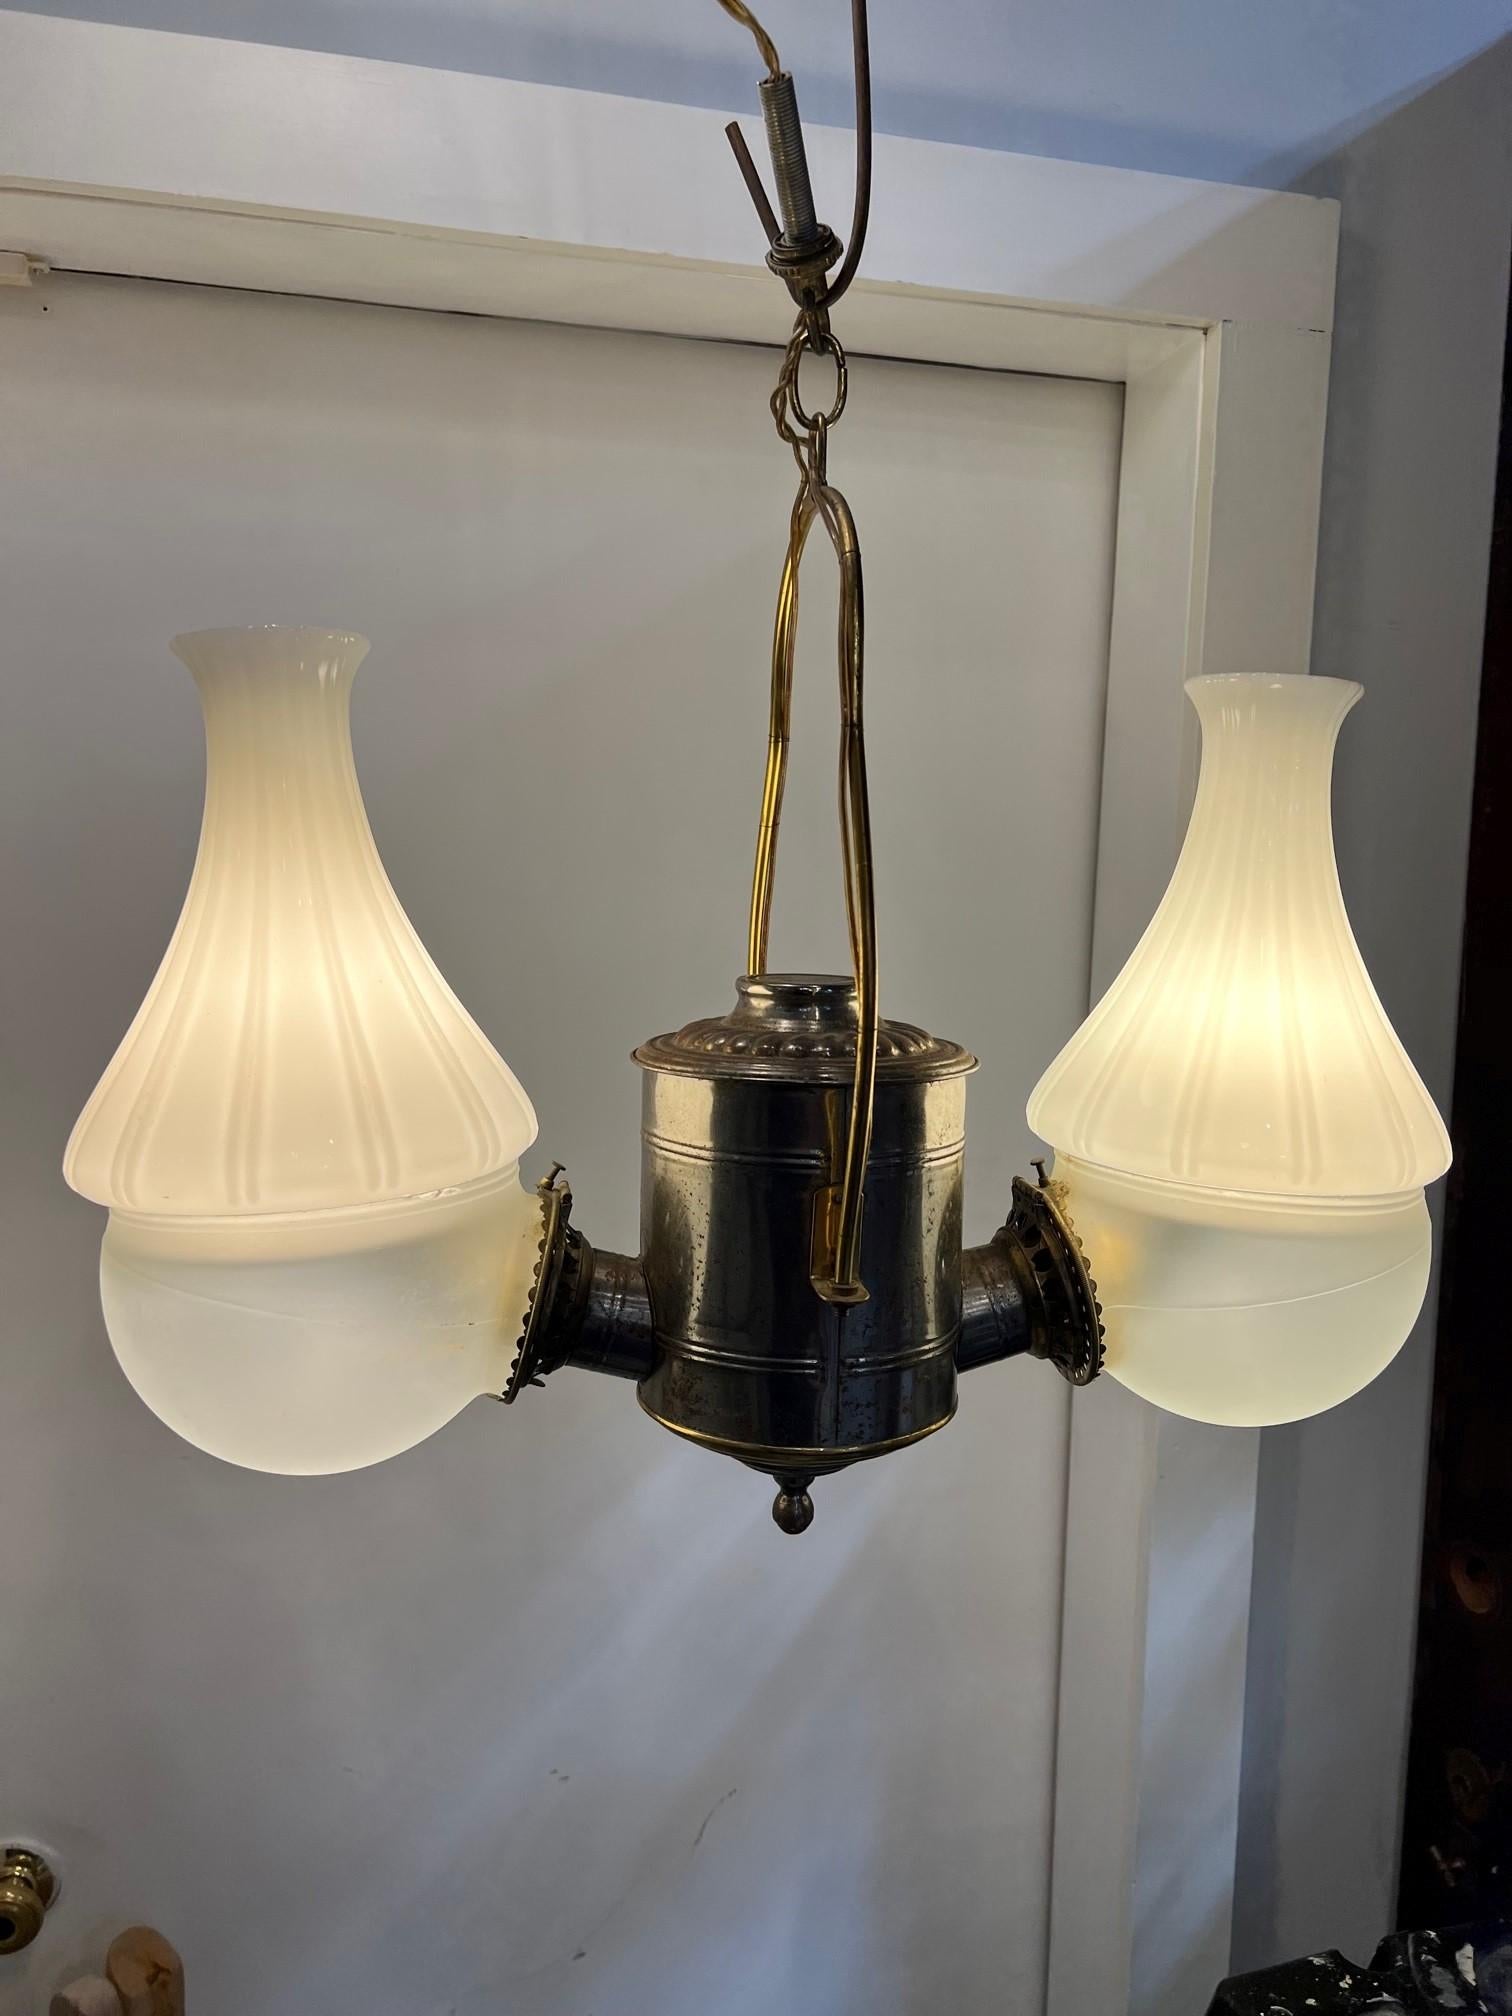 This is a 1890s double light hanging fixture by Angle Lamp Company. Originally lit by kerosene it has now been electrified. It has the original glass pieces two frosted, hemisphere globes that are topped with white chimney milk glass with scalloped